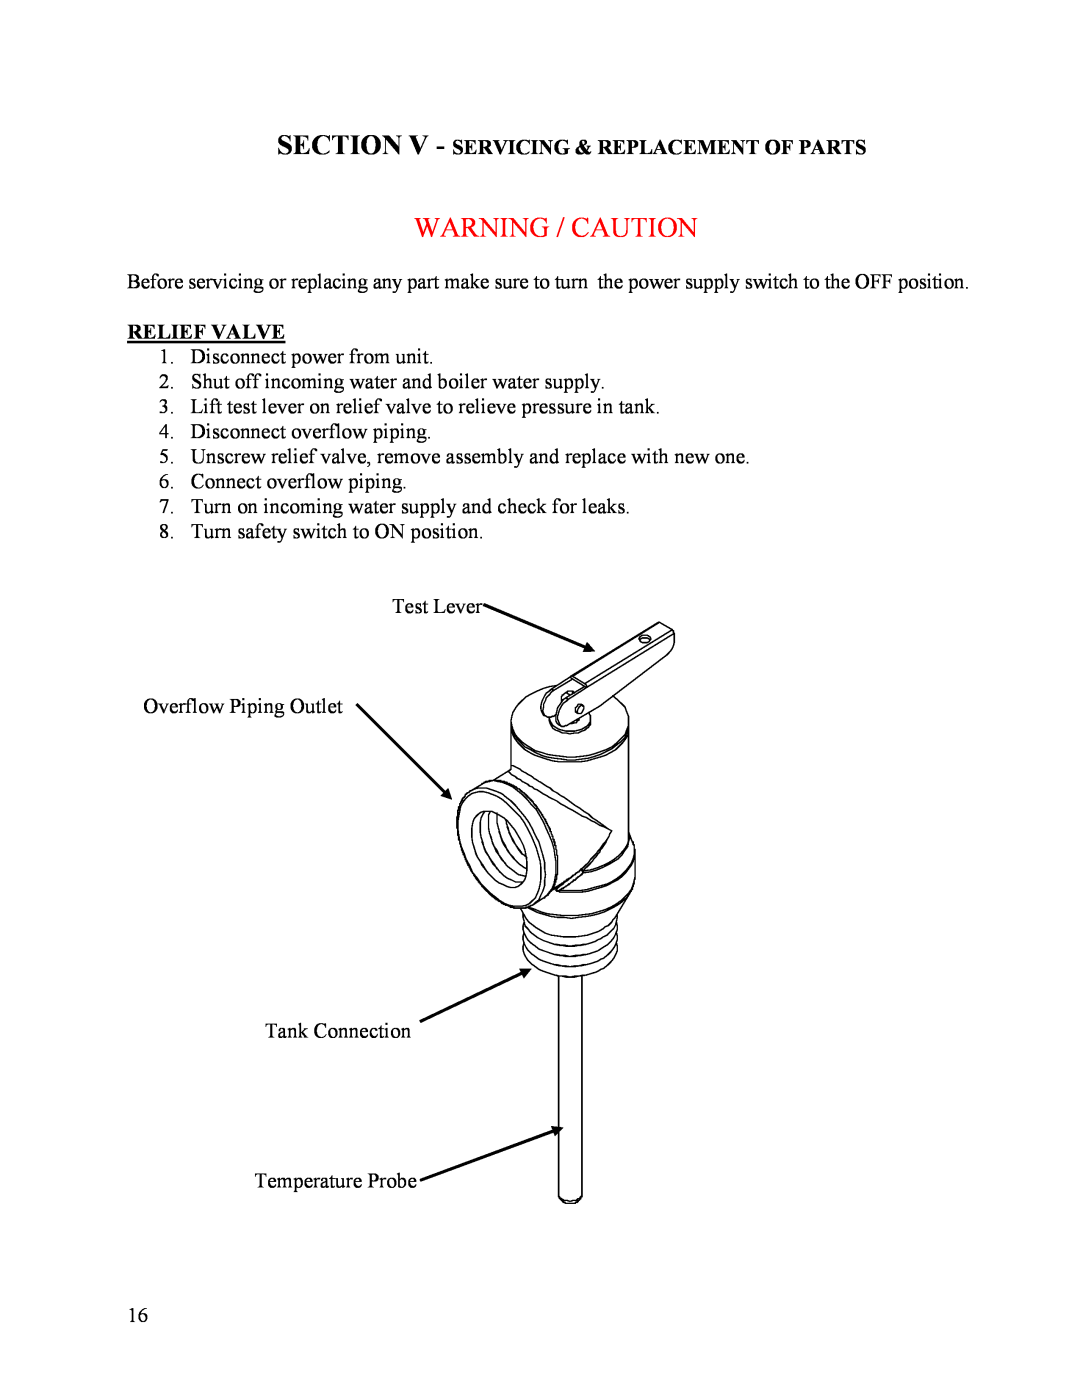 Hubbell Electric Heater Company T manual Section V - Servicing & Replacement Of Parts, Relief Valve, Warning / Caution 